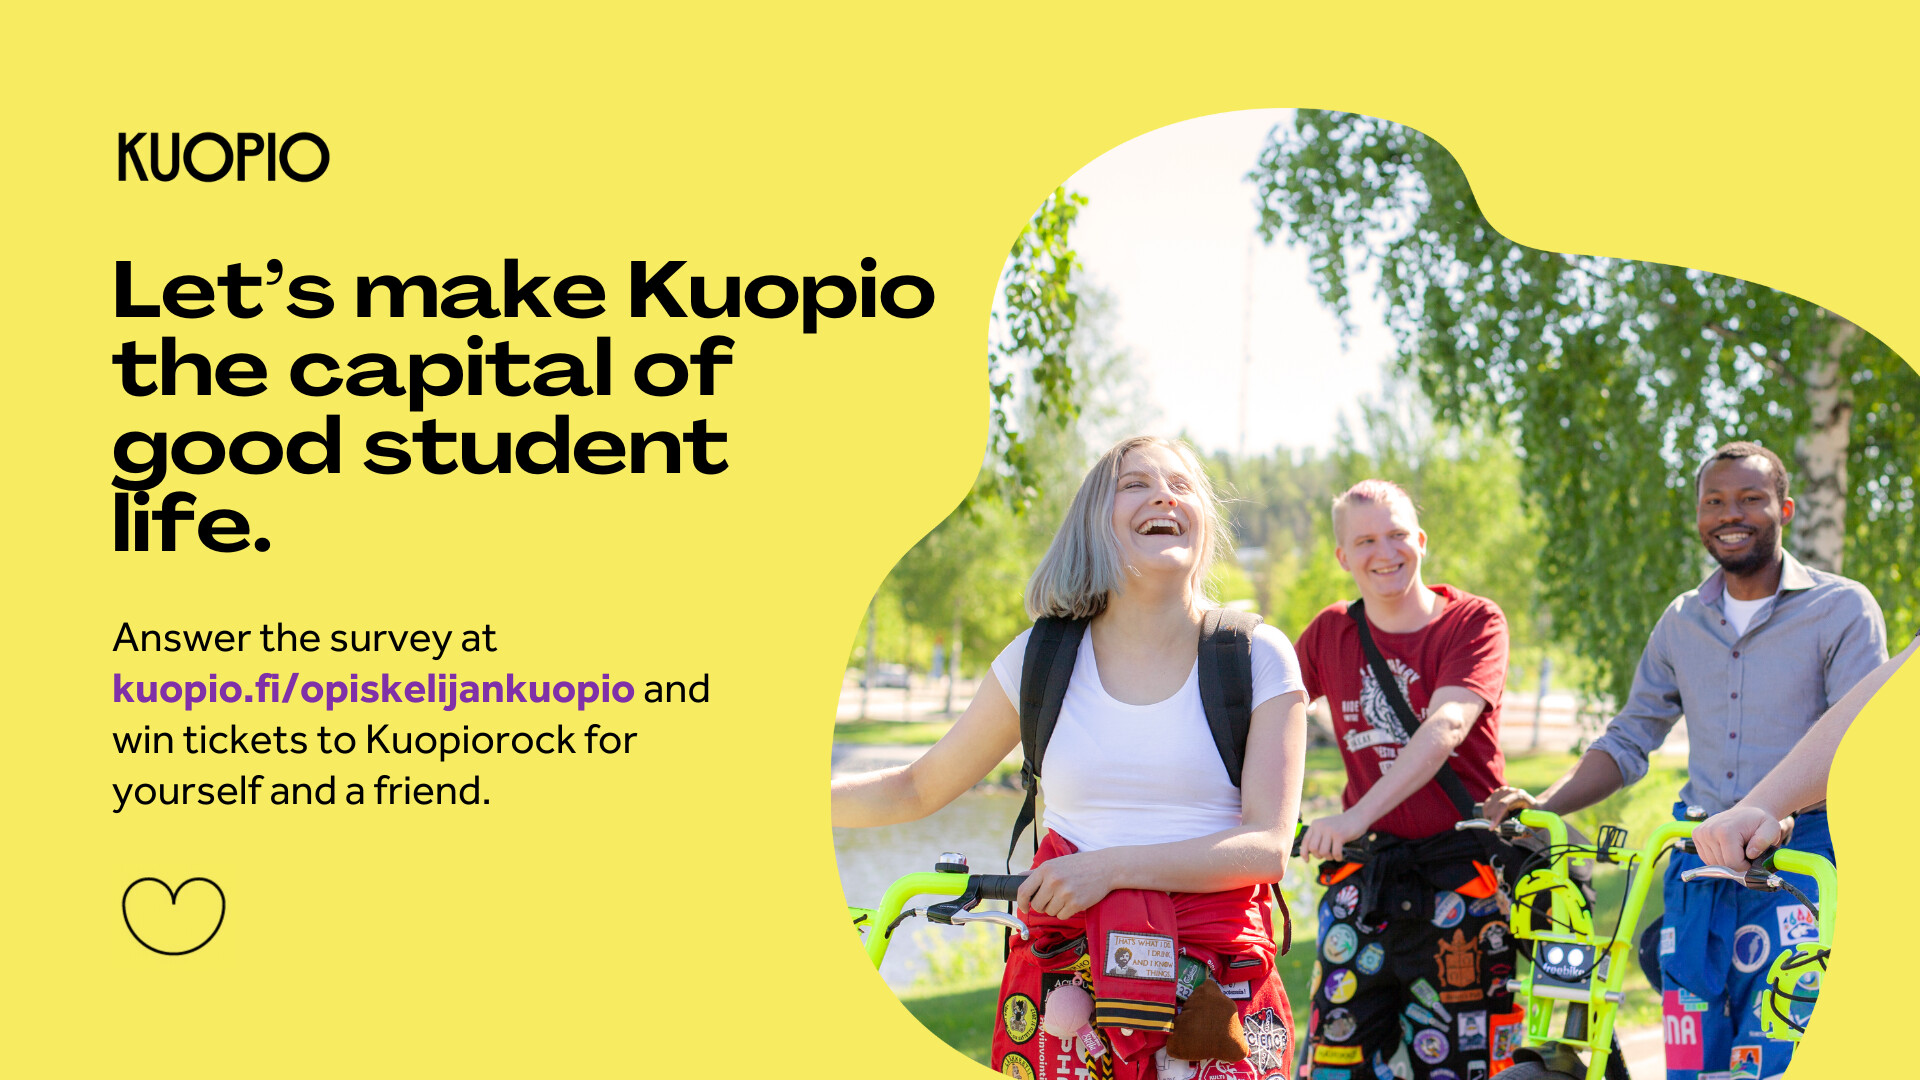 Student, what kind of city do you think Kuopio is?